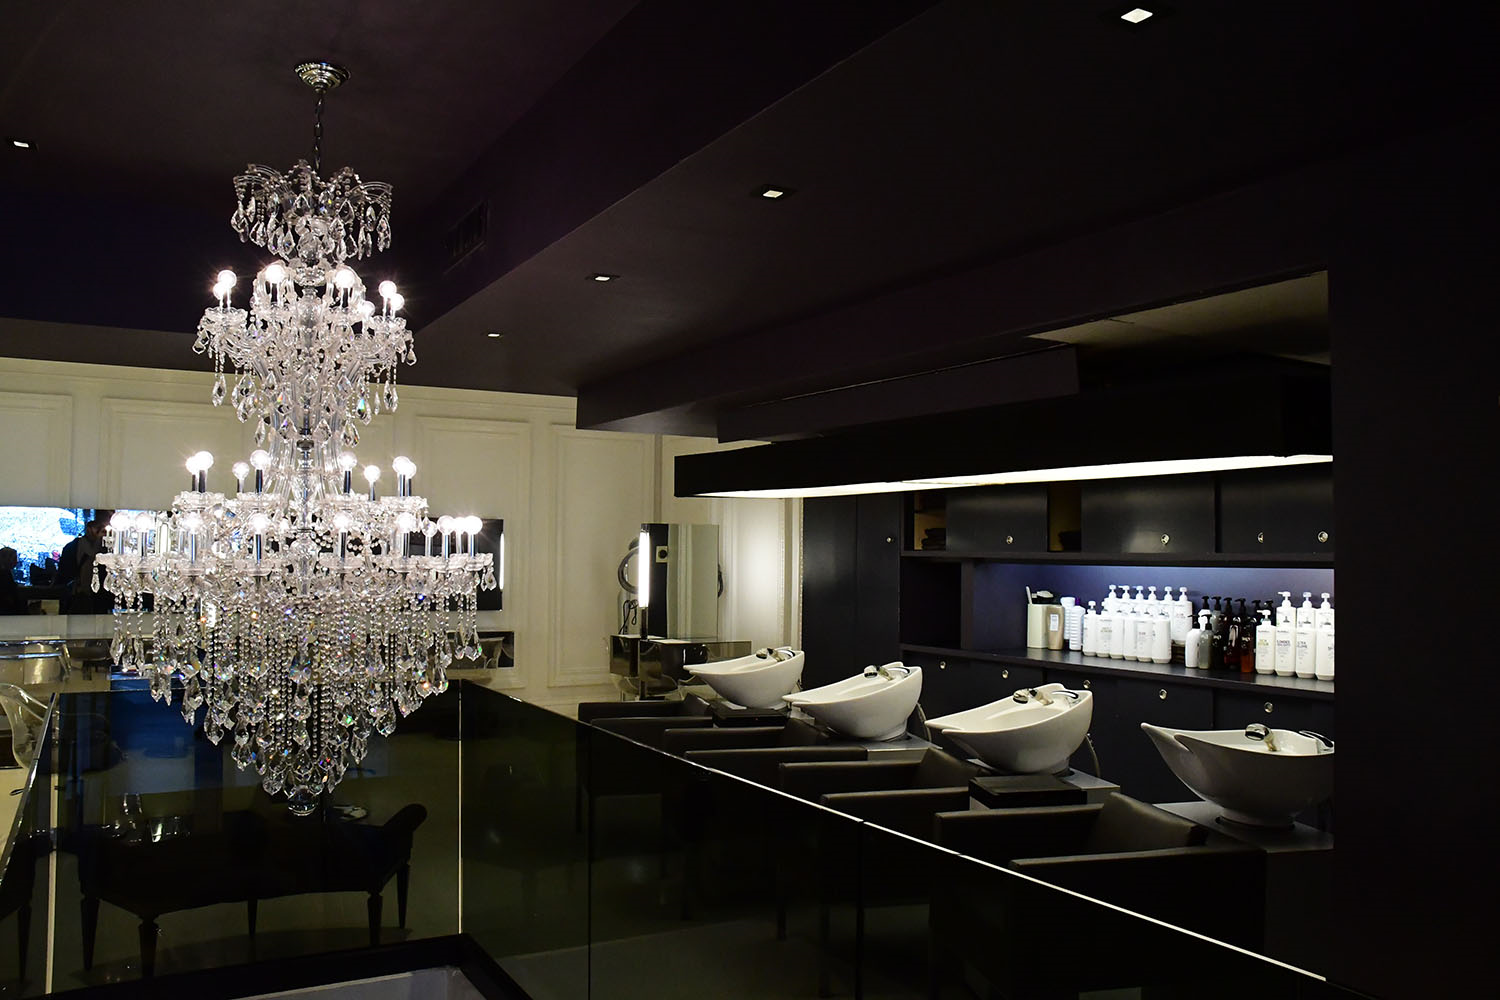 black hair salon with white sinks and a large chandelier